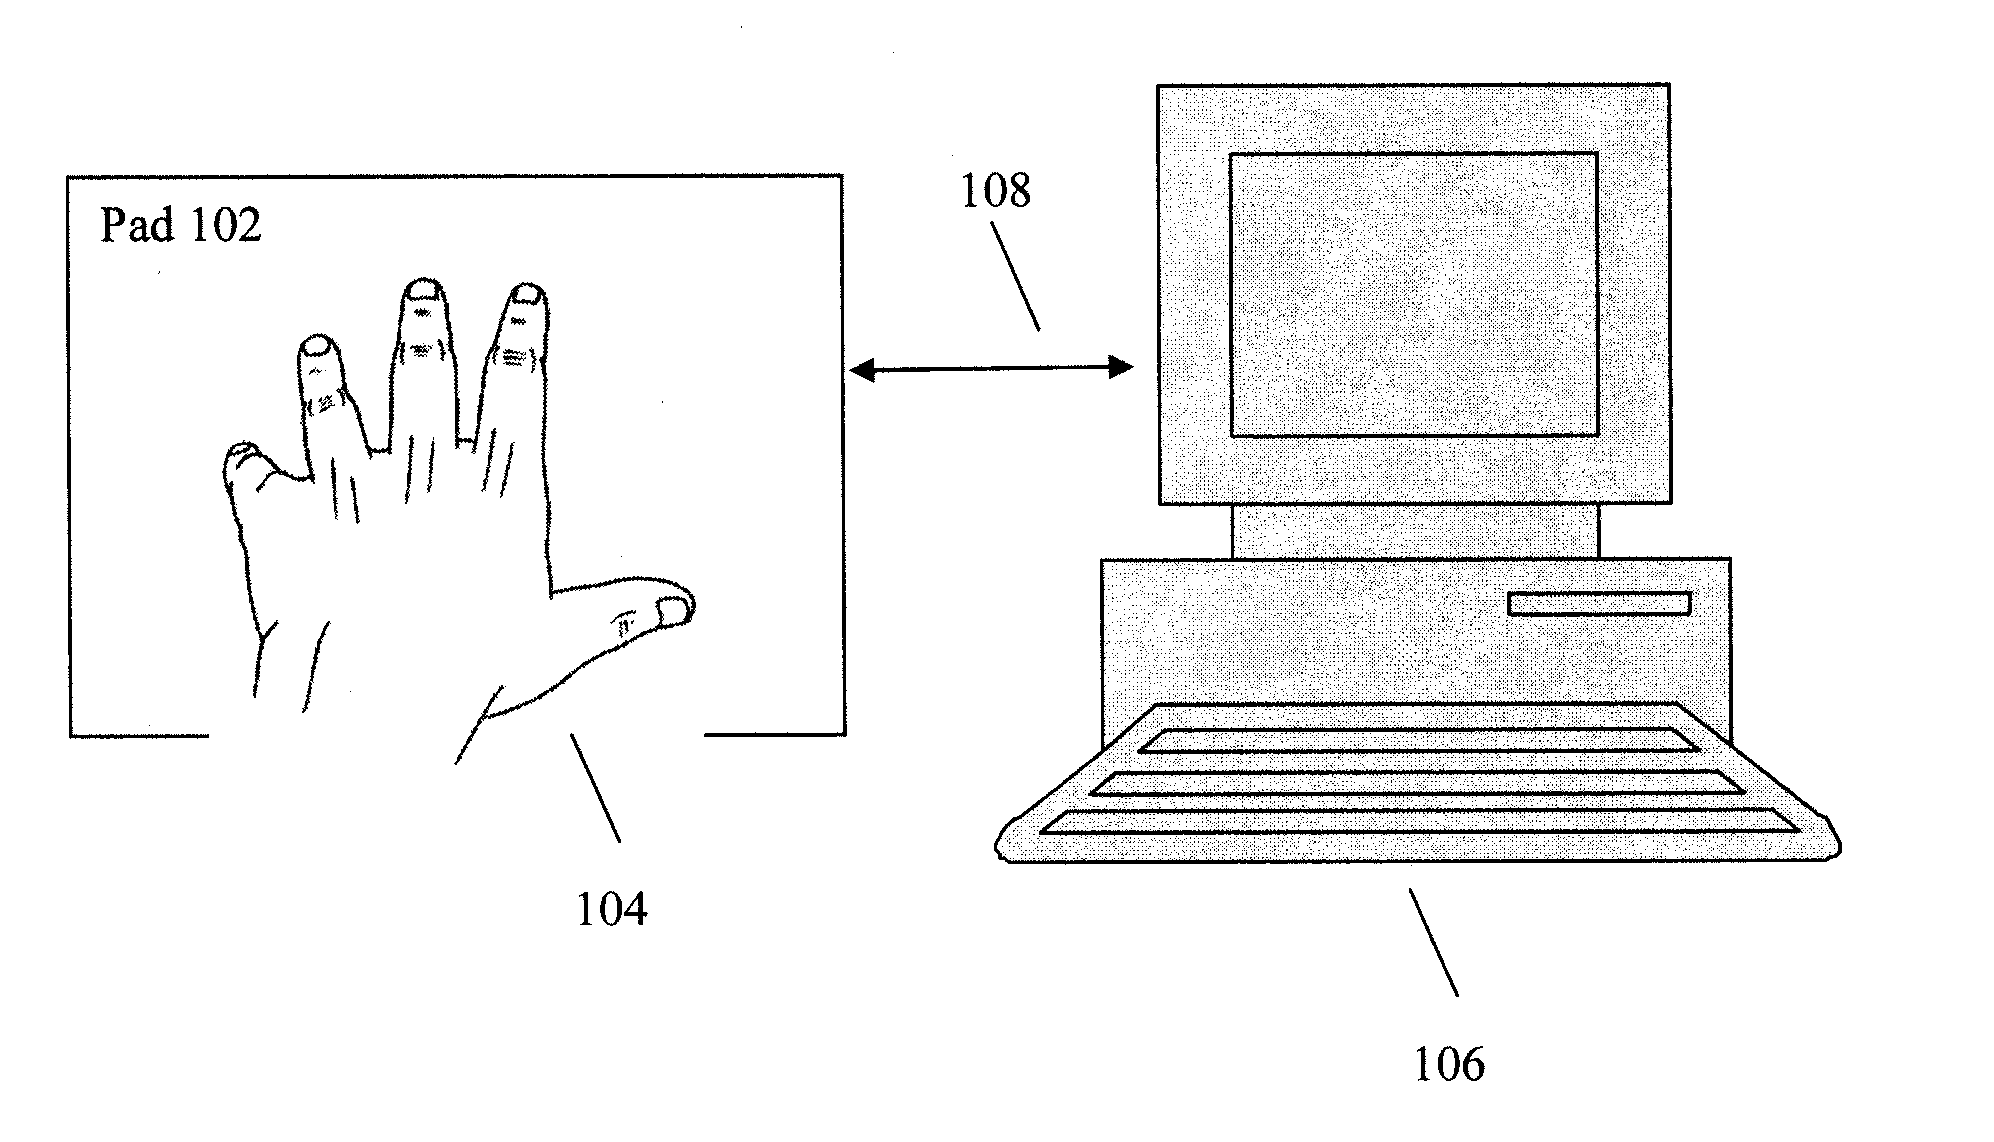 System and Method for Creating Optimal Command Regions for the Hand on a Touch Pad Device